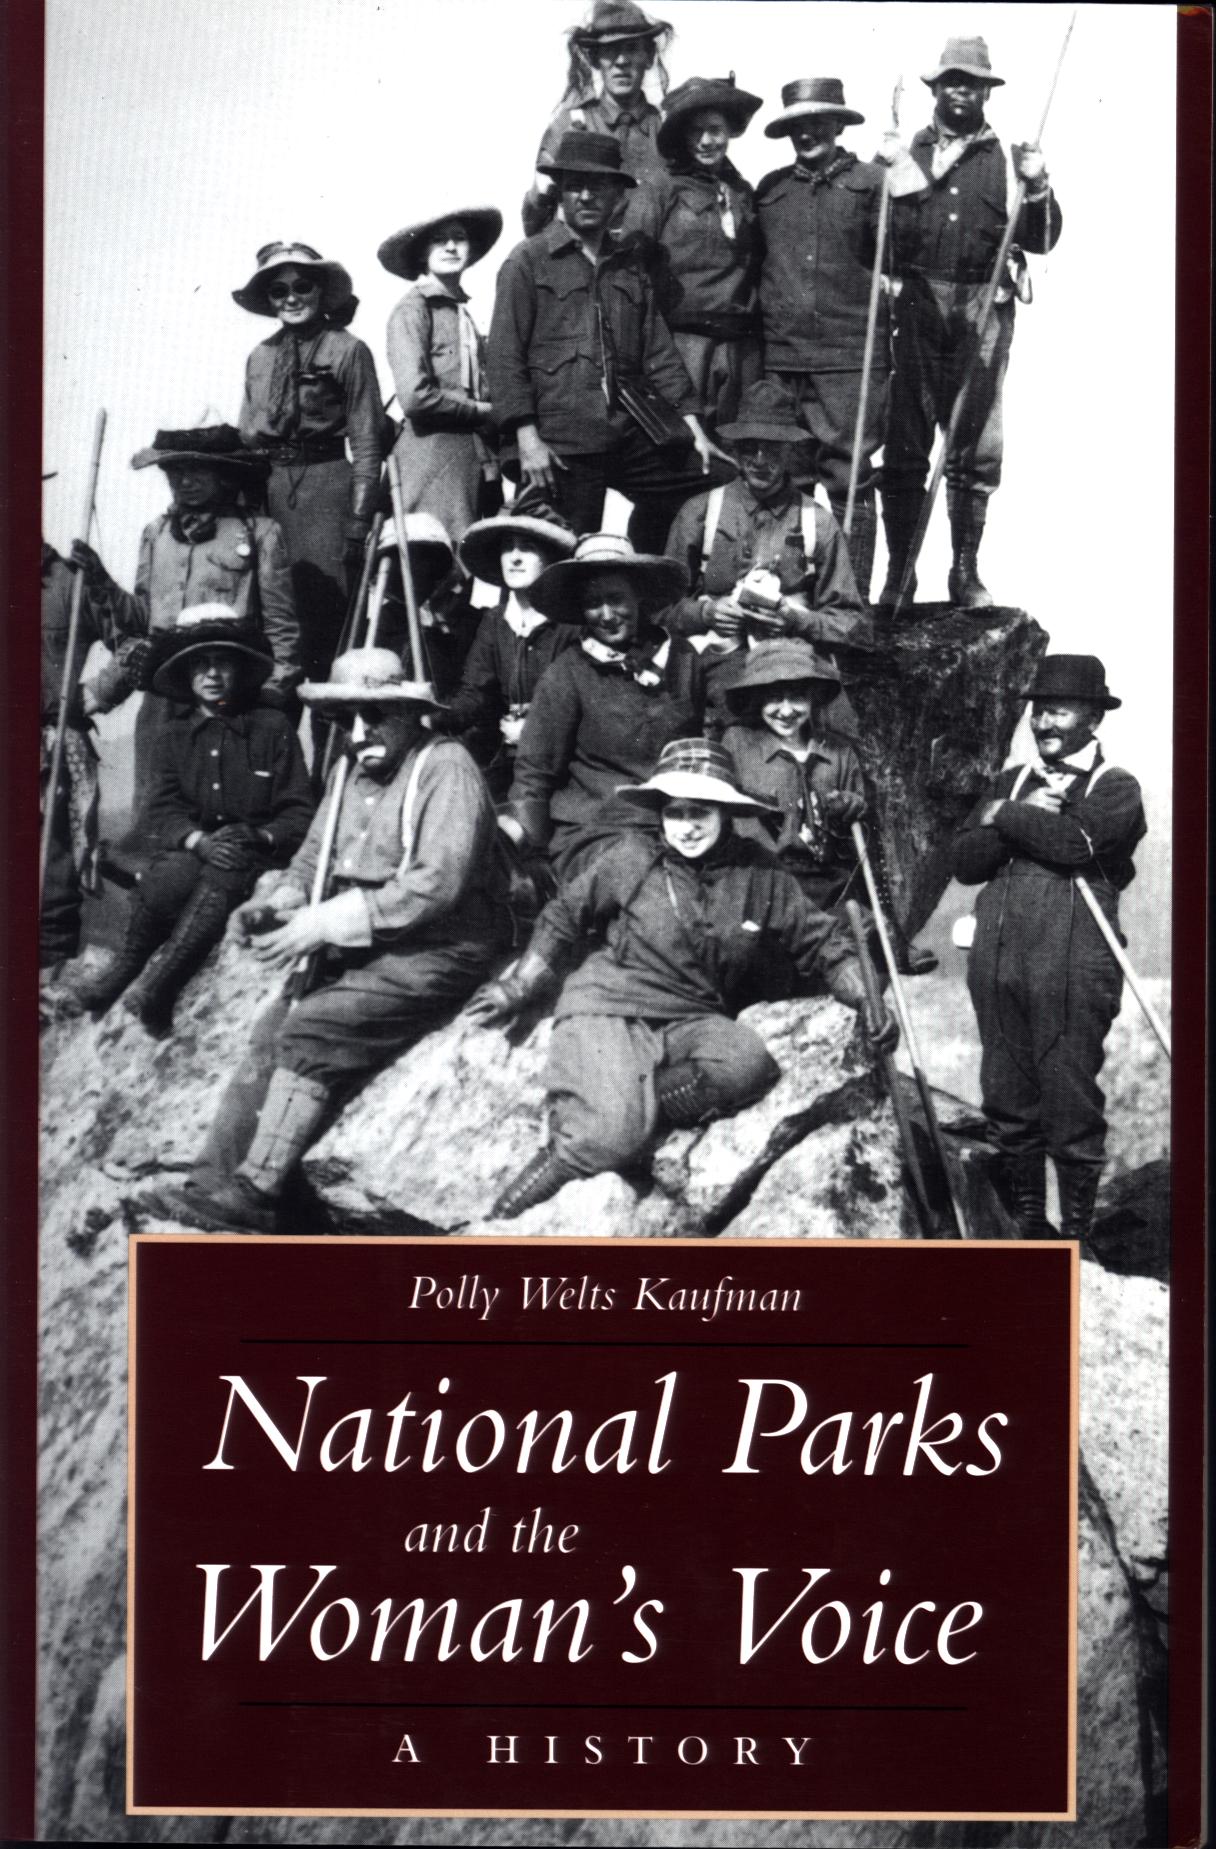 NATIONAL PARKS AND THE WOMAN'S VOICE: a history. 